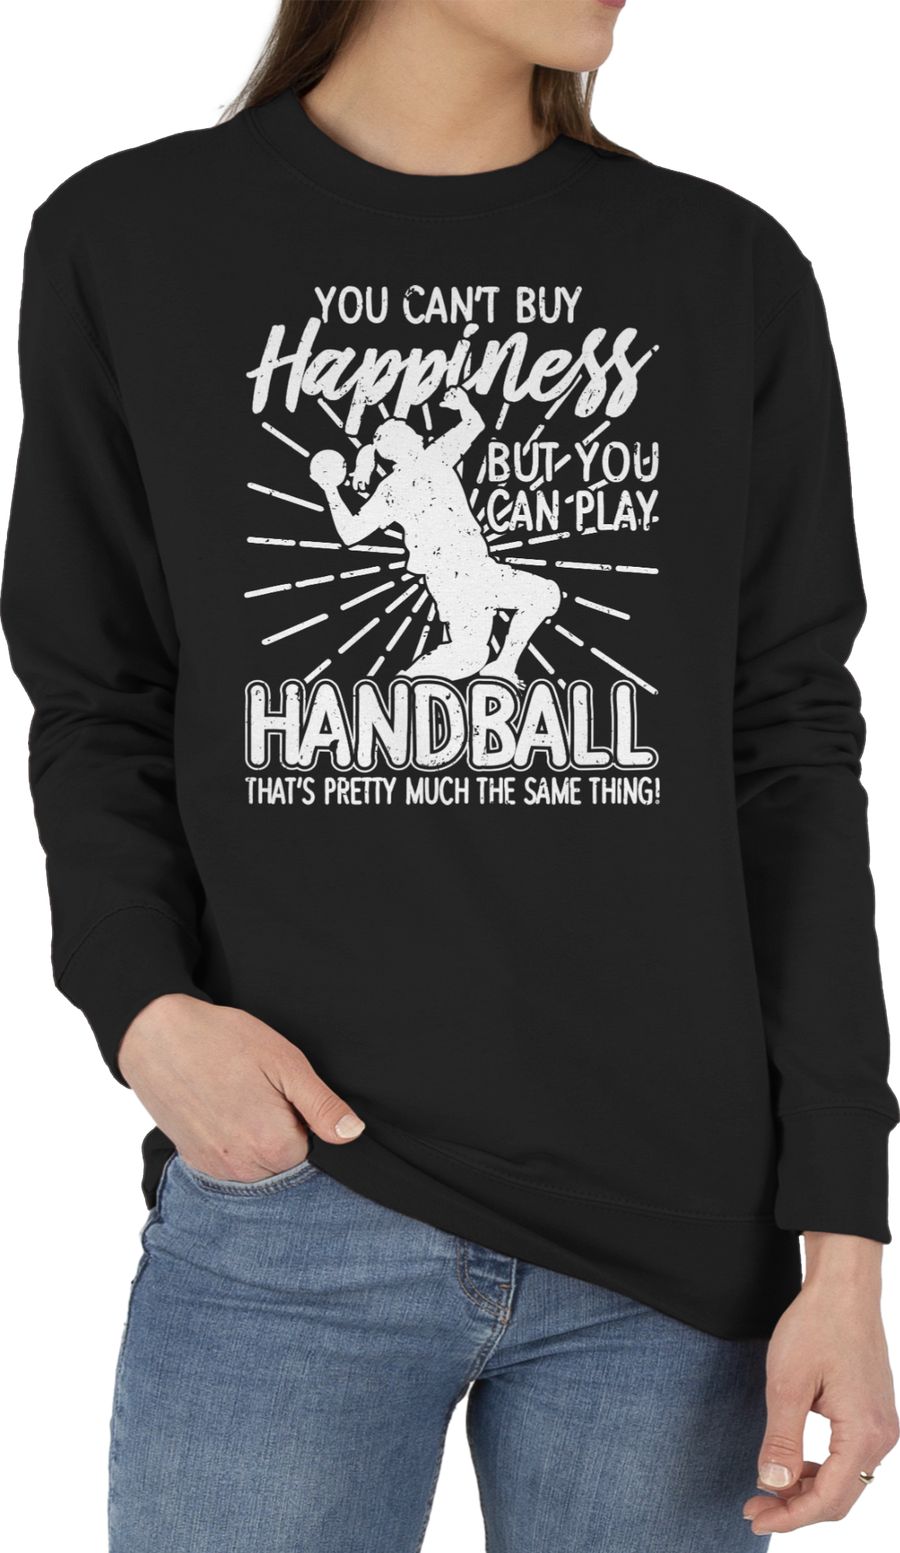 You can't buy happiness, but you can play Handball - schwarz